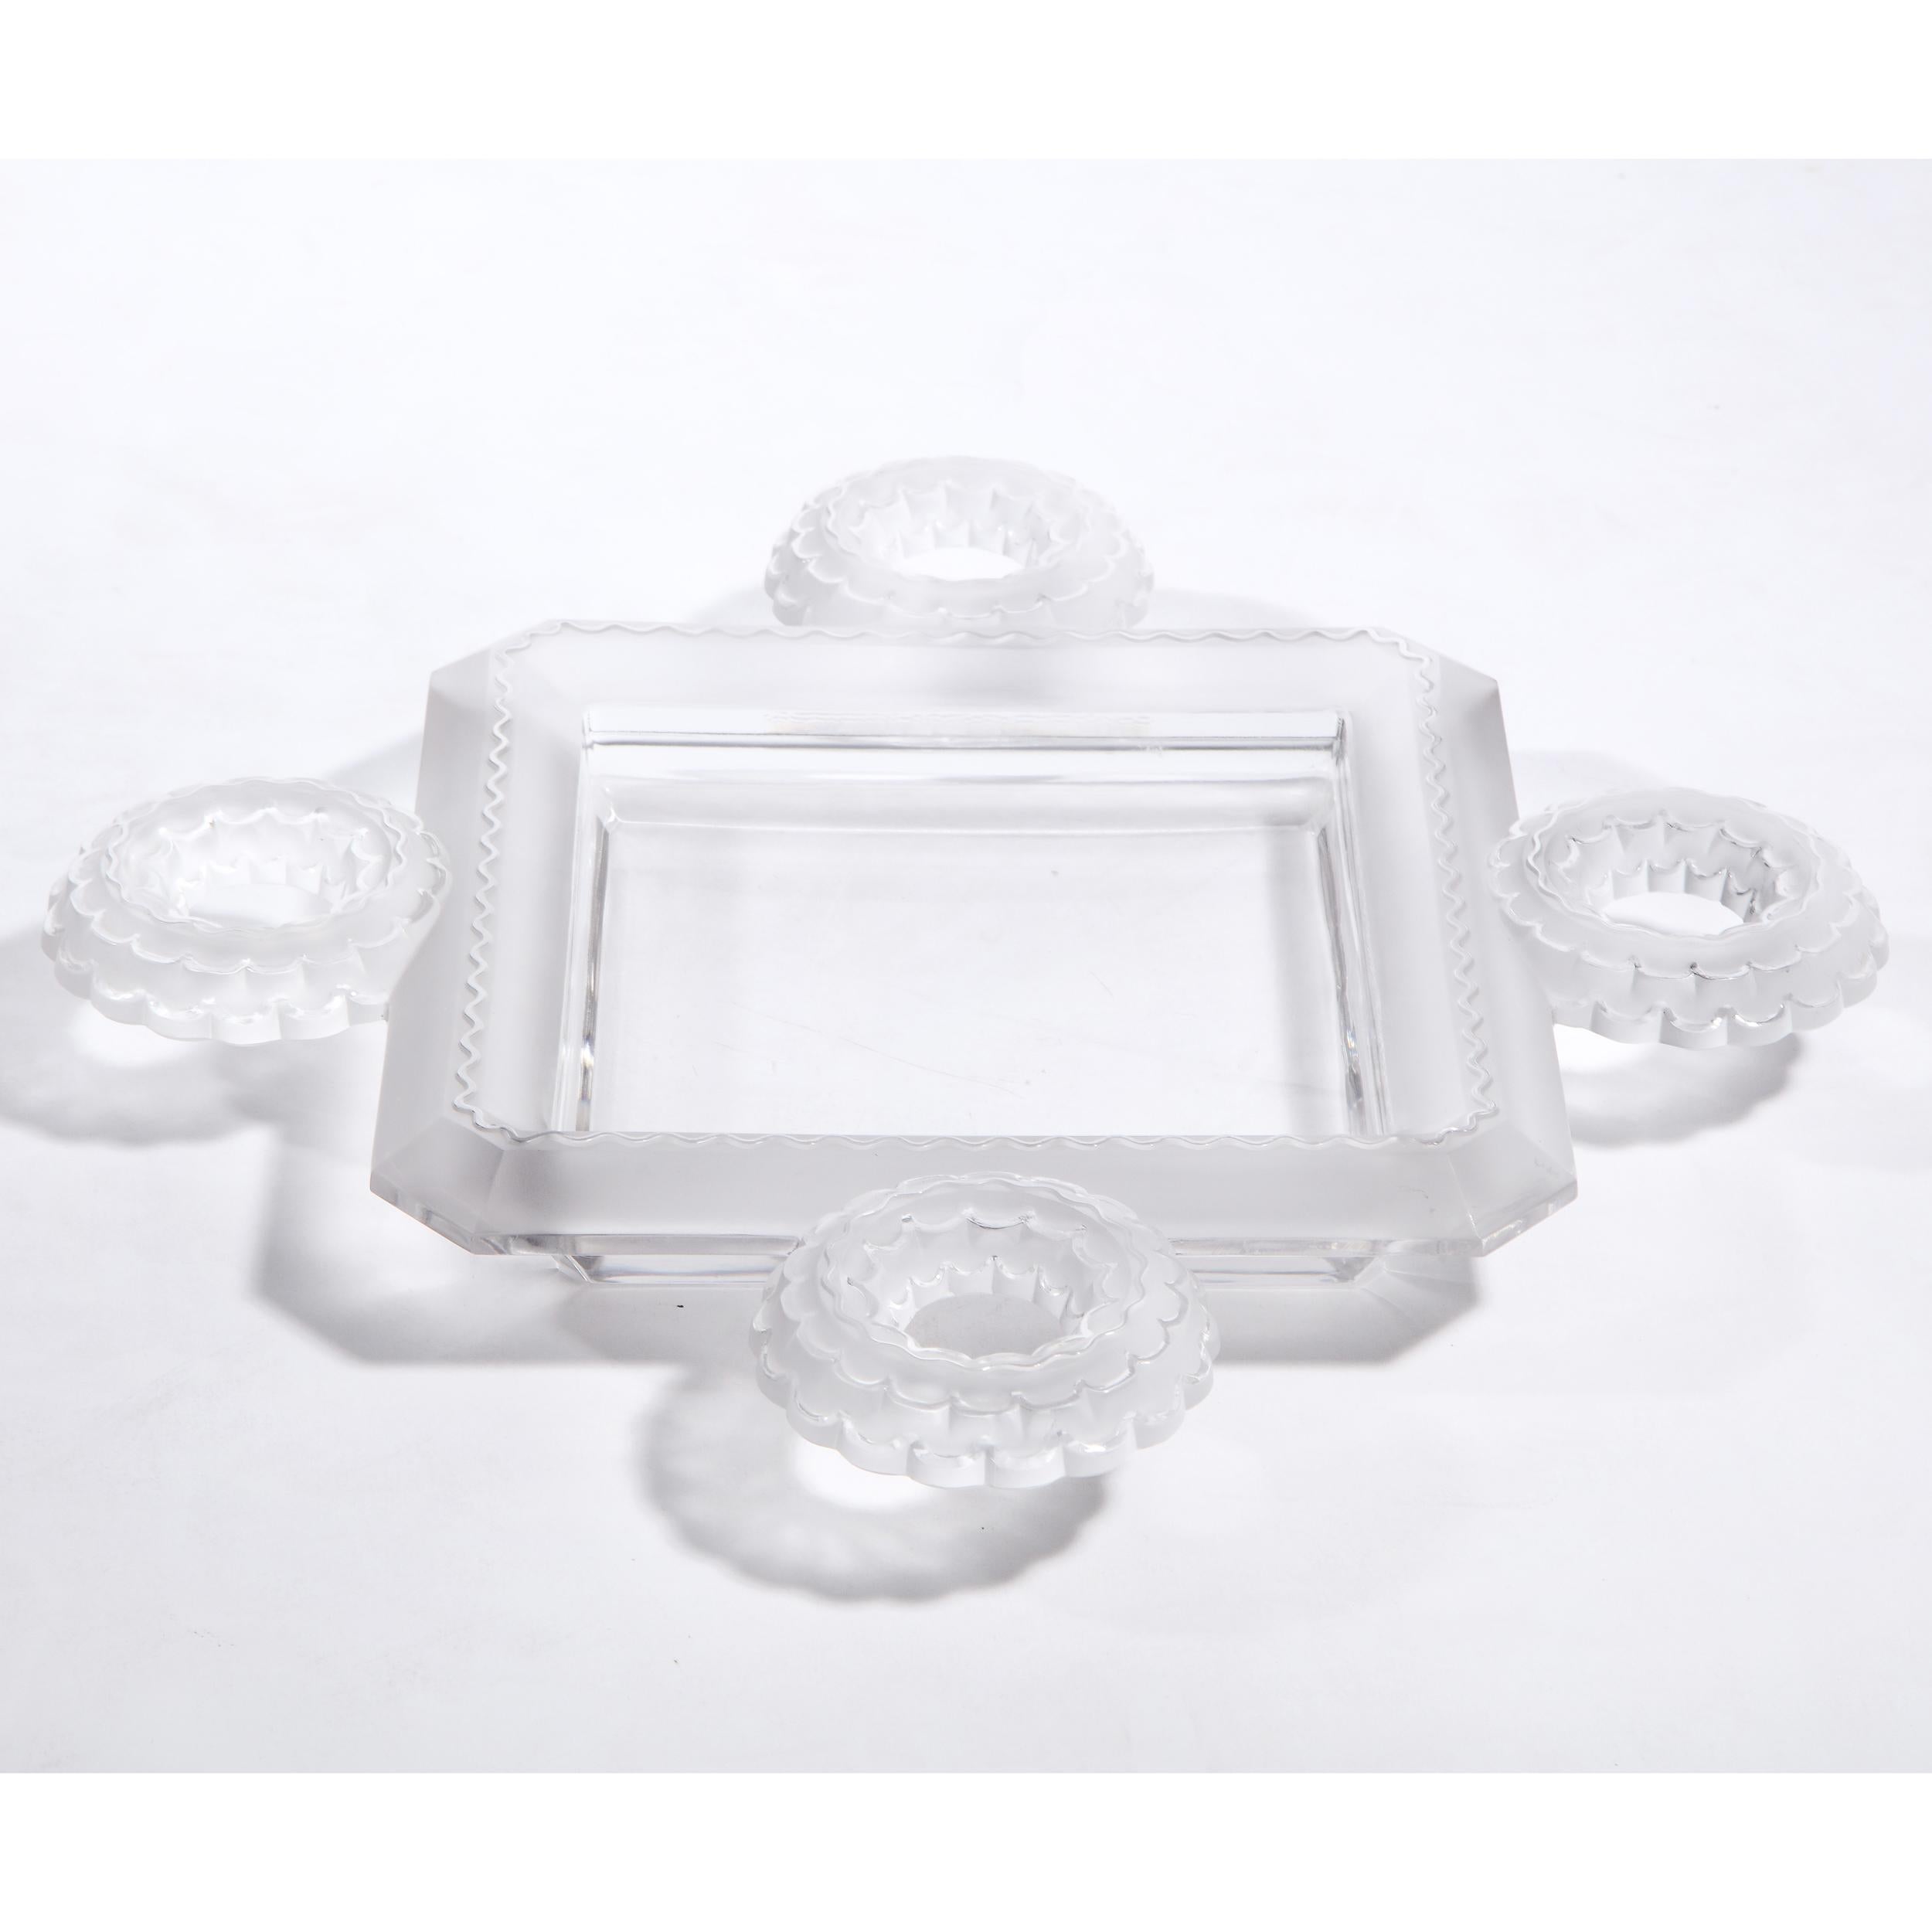 This elegant modernist crystal decorative tray was realized by Lalique- one of the world's most storied and celebrated makers of crystal and luxury goods since 1817 in France- during the latter half of the 20th century. It features a square